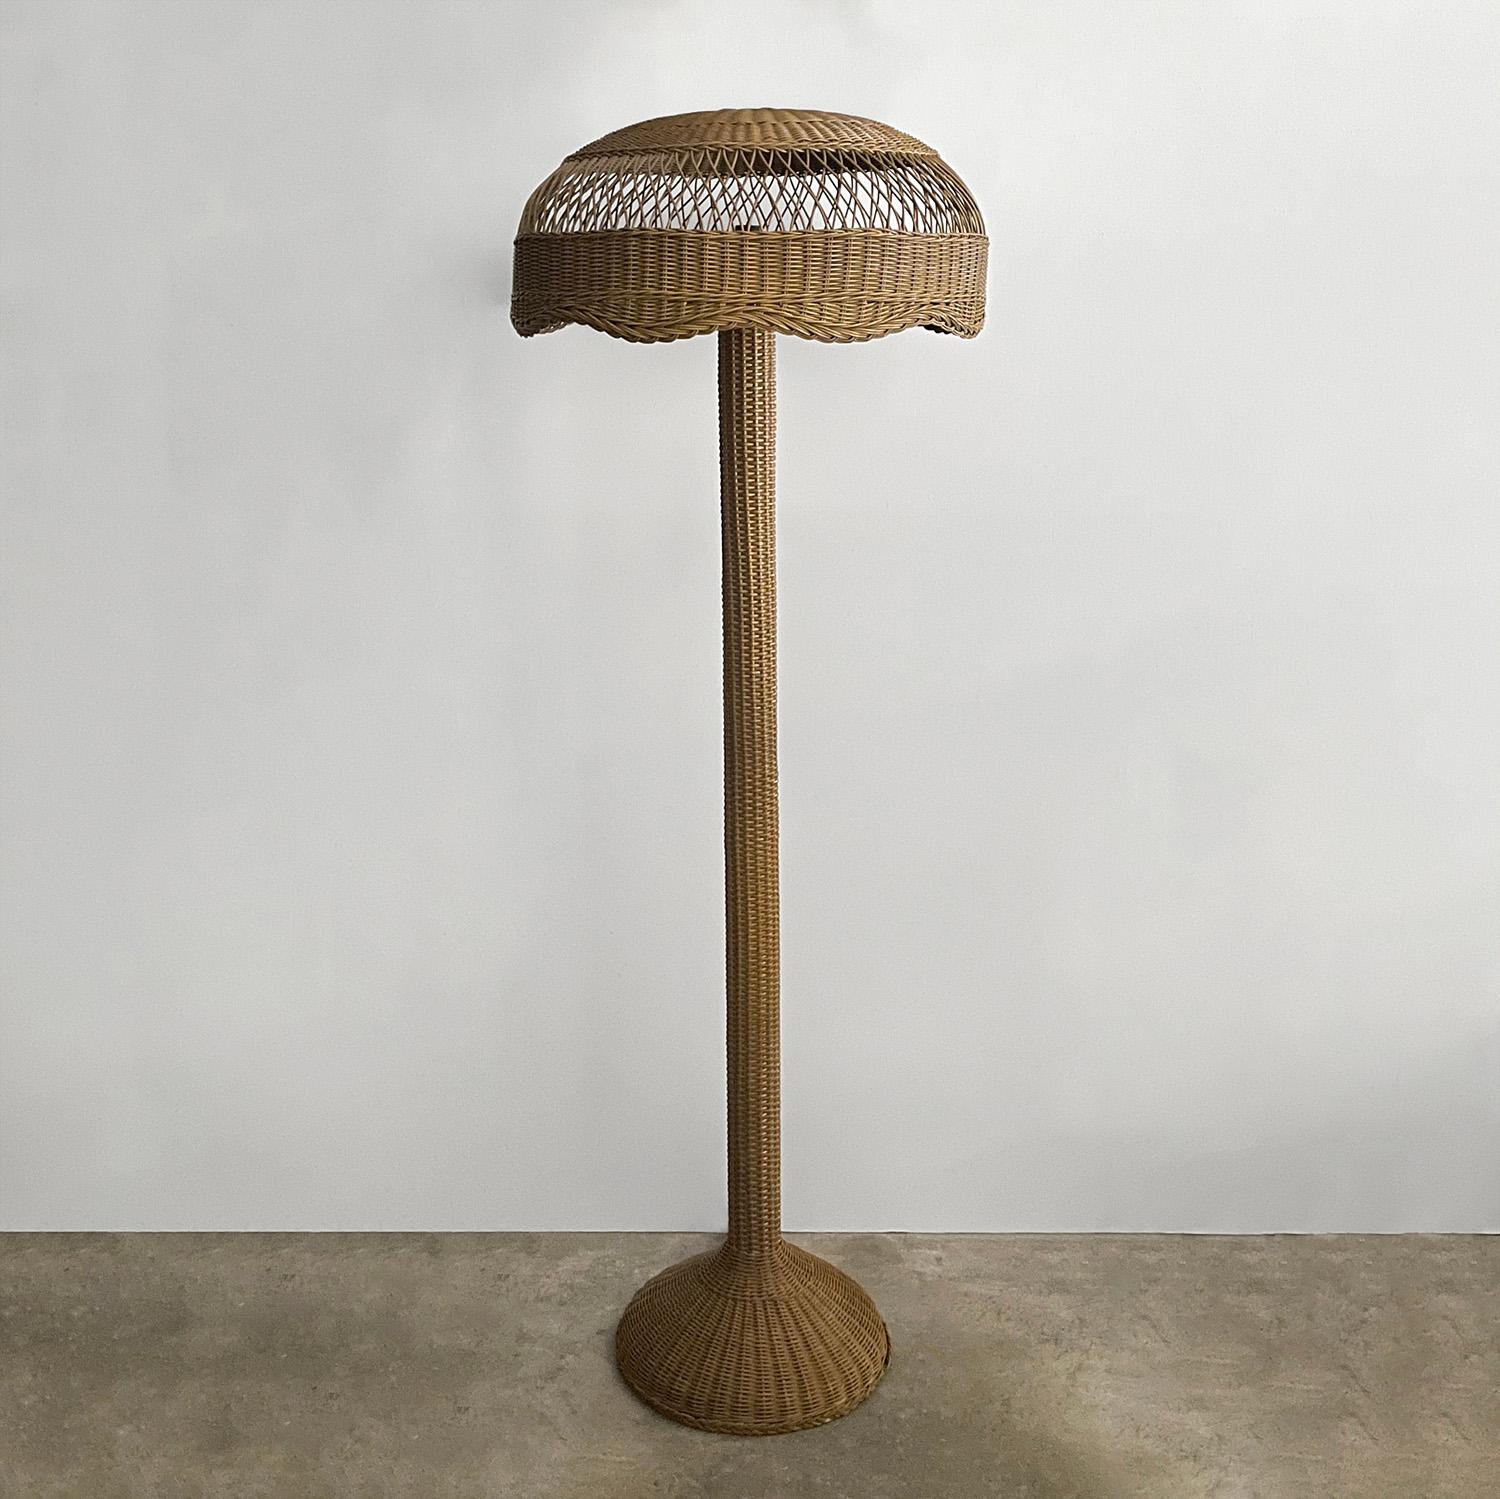 French wicker floor lamp
France, mid century 
Intricately woven wicker encompasses the lamp frame 
Shade has a lovely scalloped edge detail and illuminates light beautifully 
Wicker has minor loss and imperfections 
Newly reconditioned 
Patina from